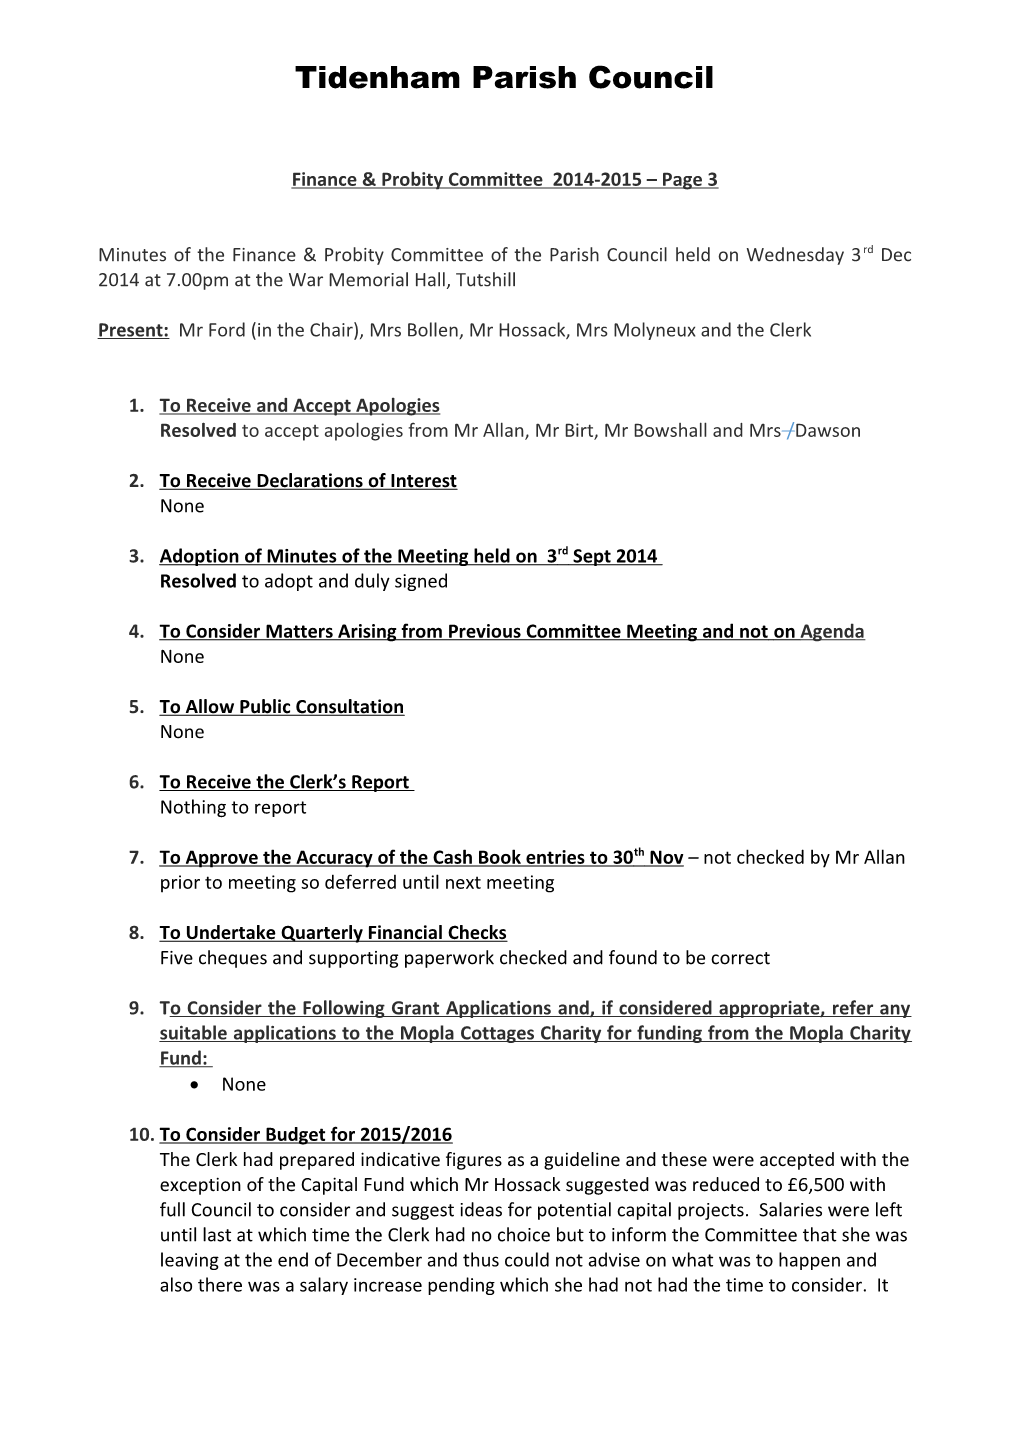 Finance & Probity Committee 2014-2015 Page 3